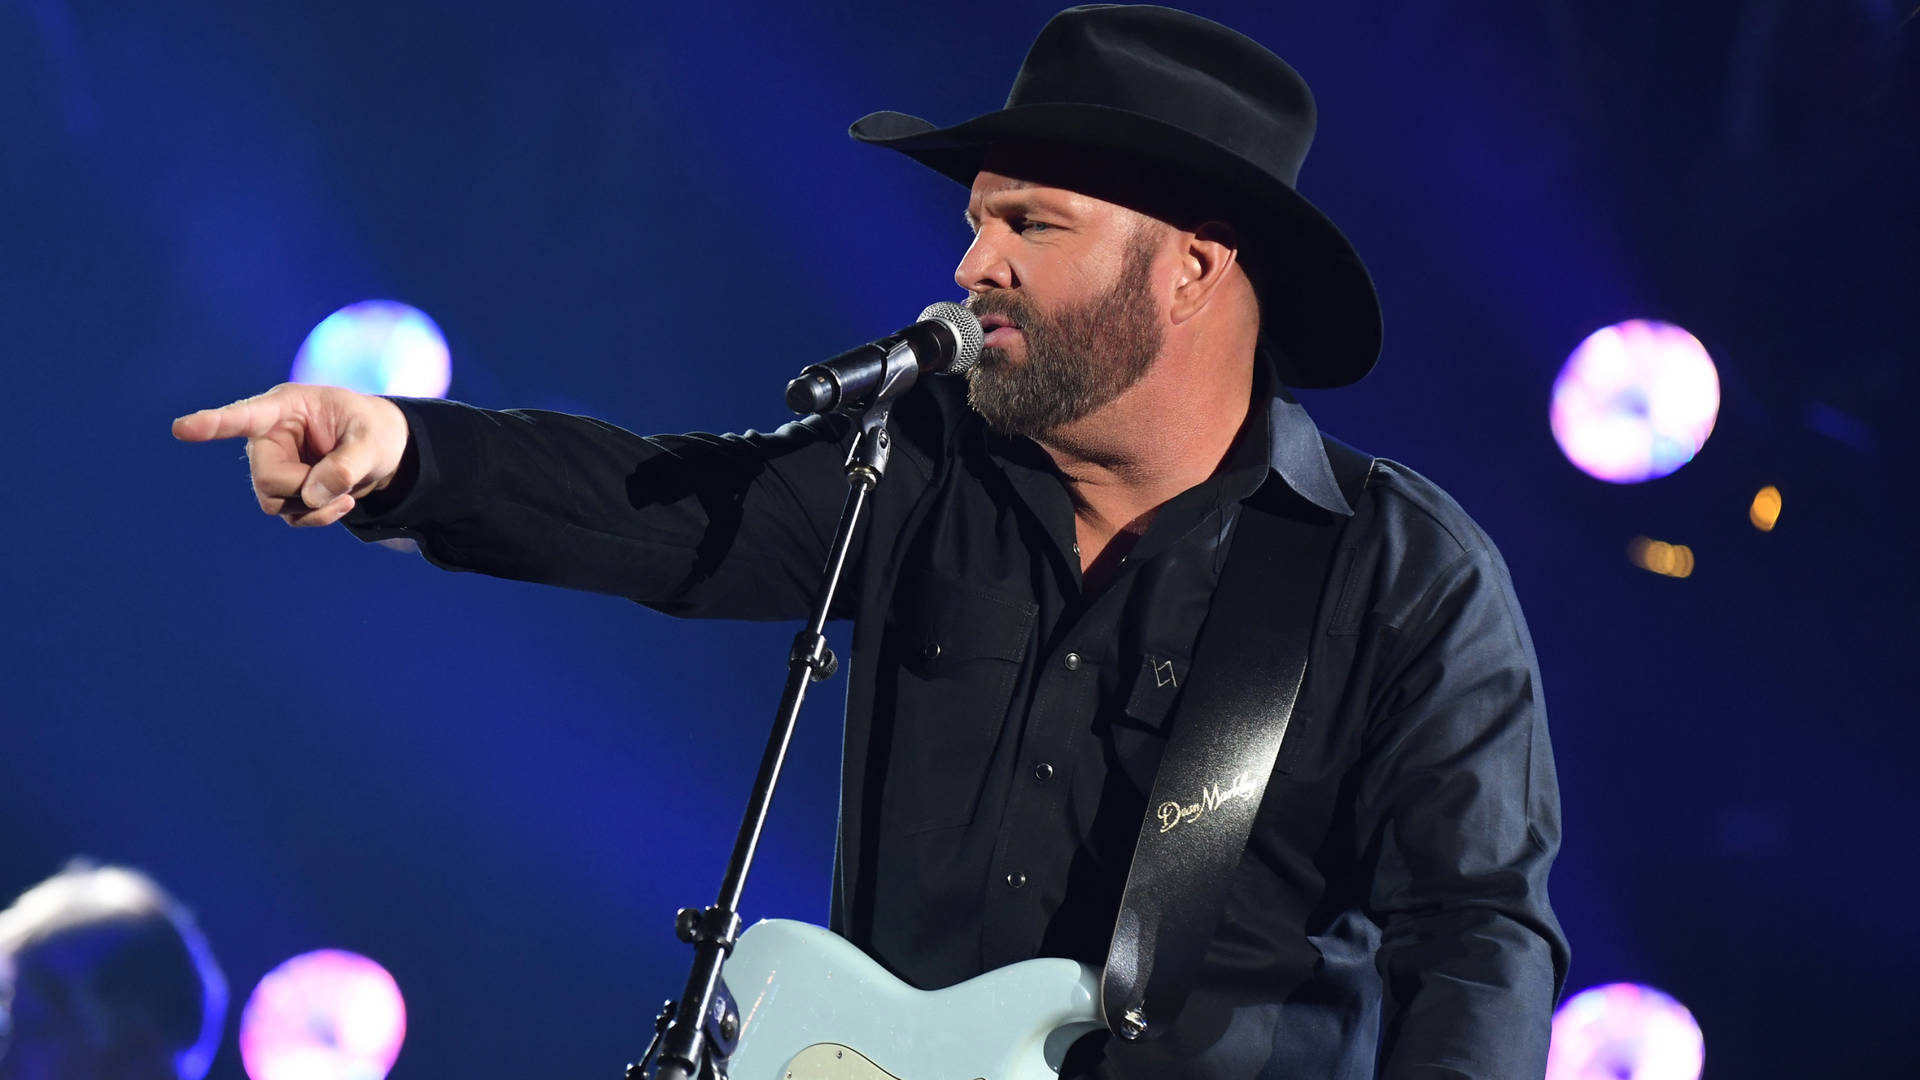 Garth Brooks On Blue Picture